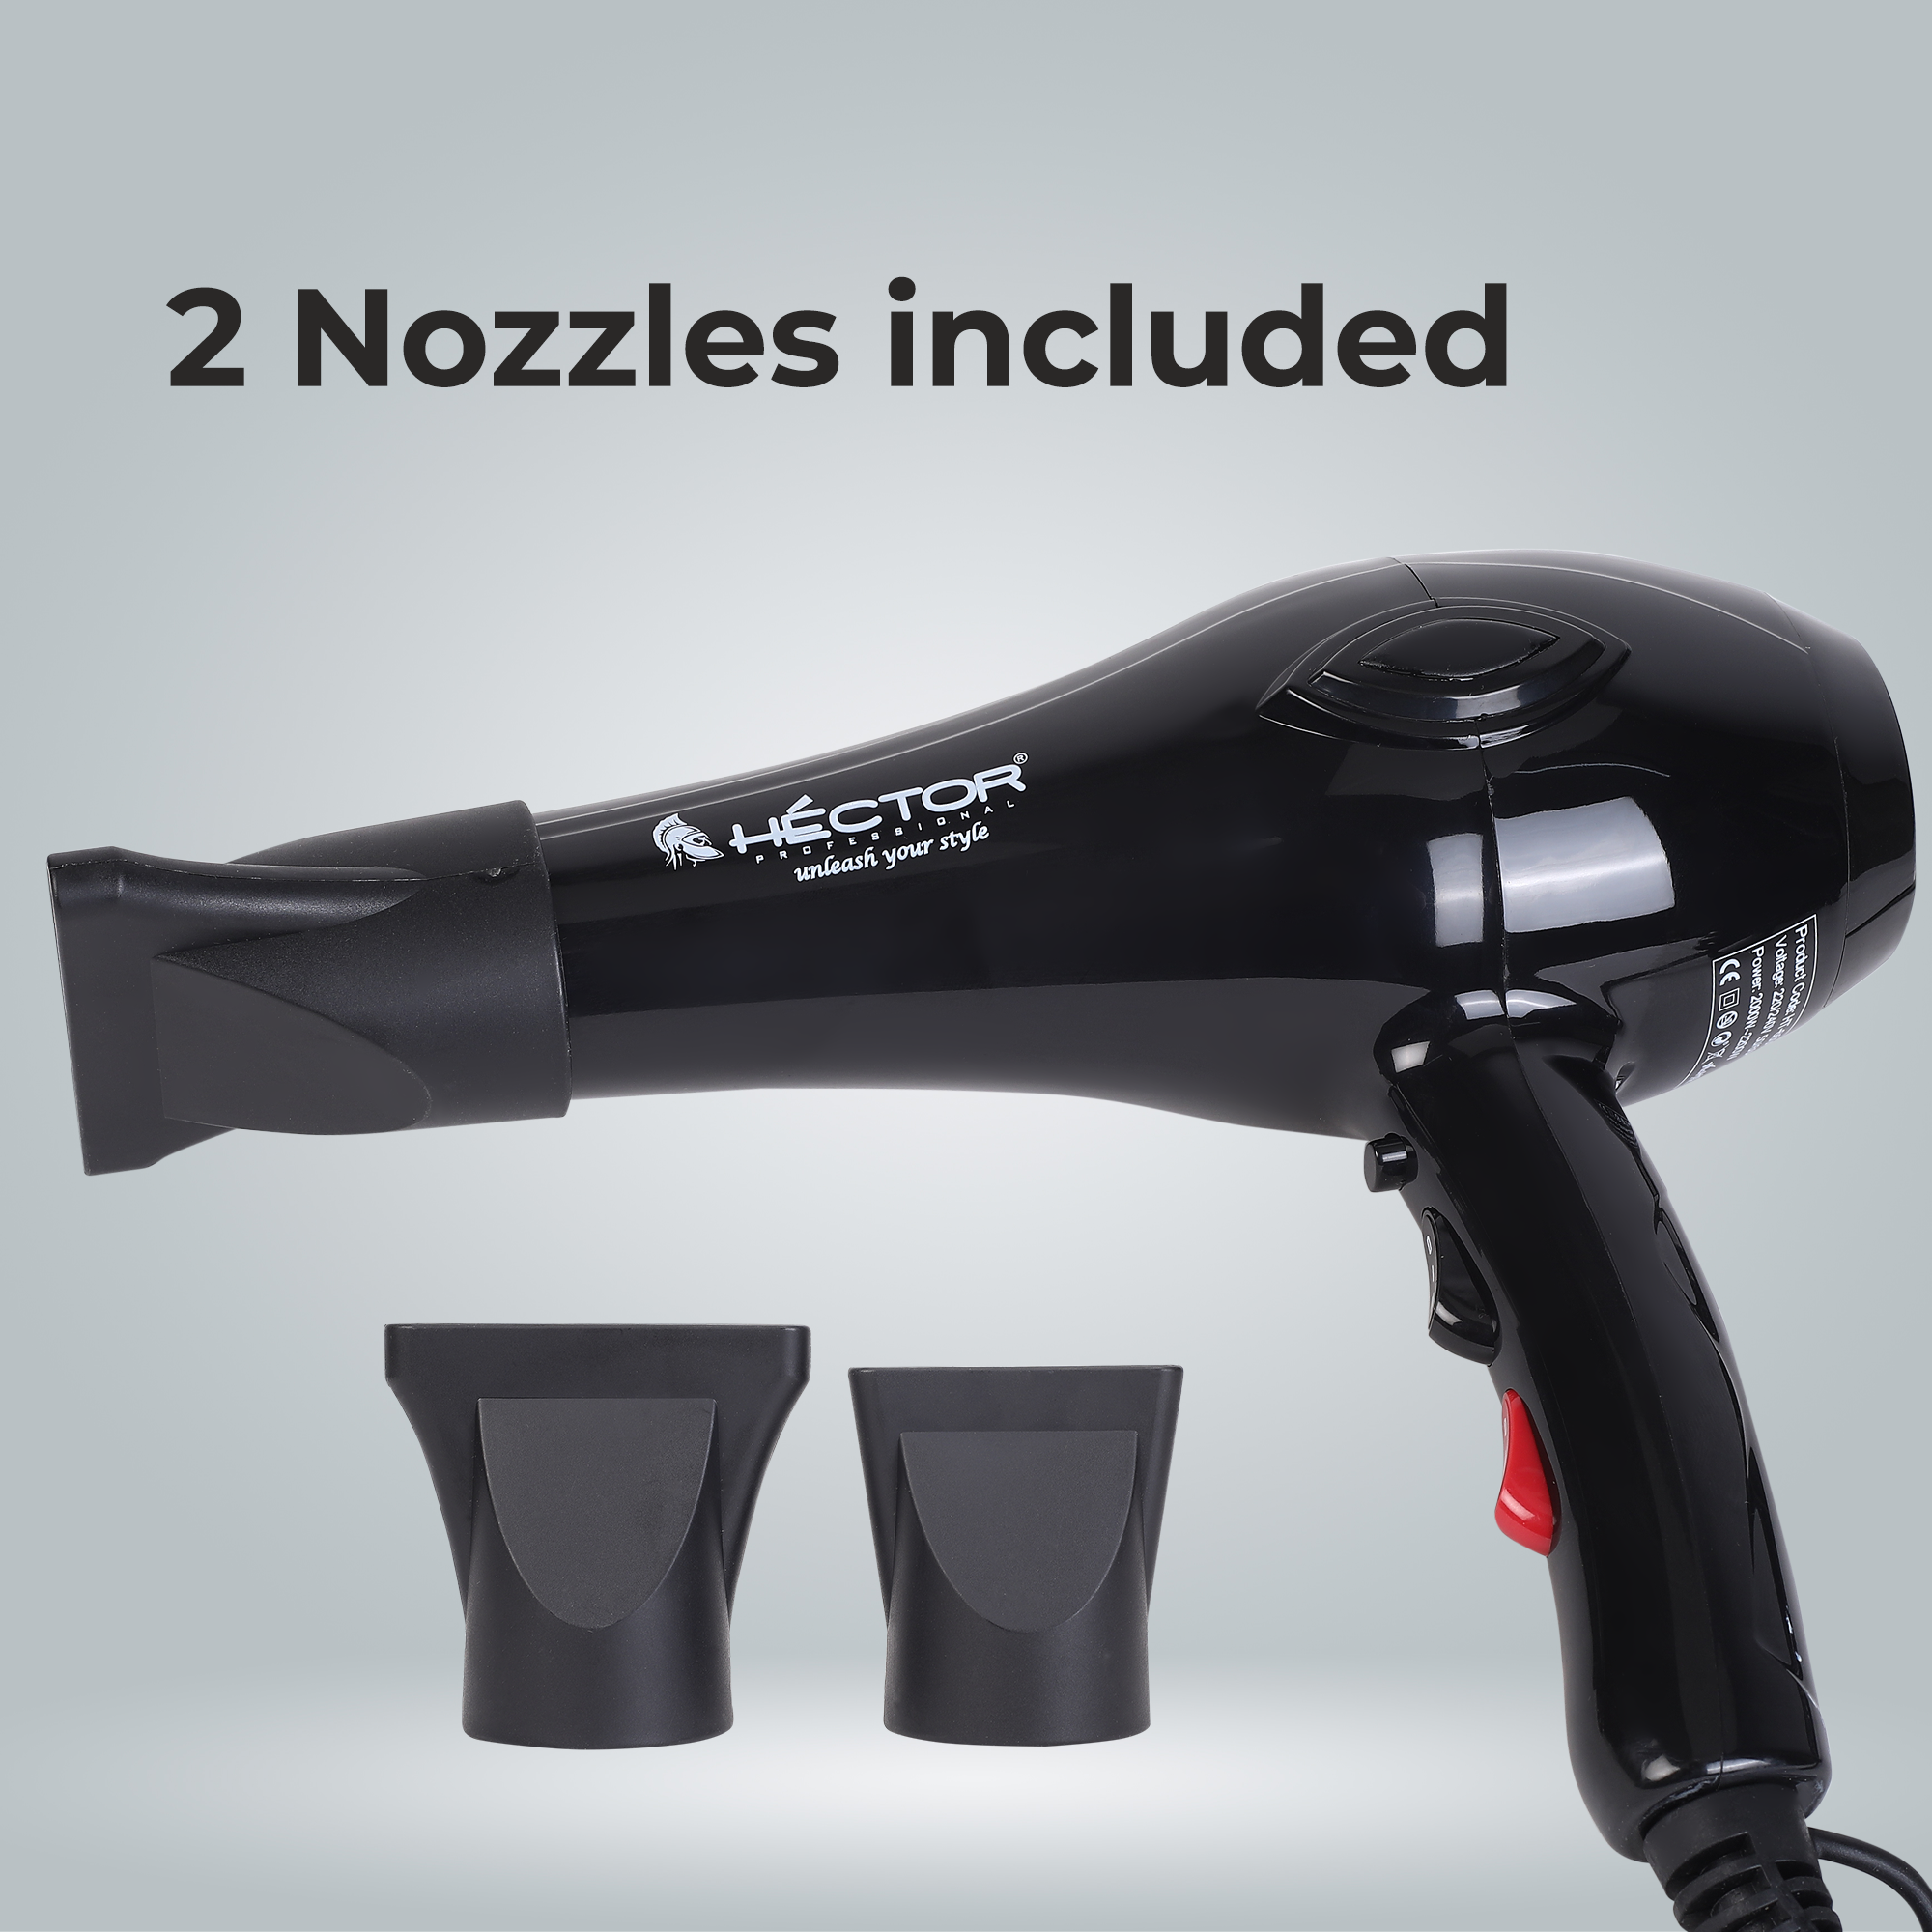 Rock light Salon Grade Professional Hair Dryer for Men and Women Styling  Comb Nozzle 5 Attachments Hot and Cool Air 2000 Watts Black   Amazonin Beauty